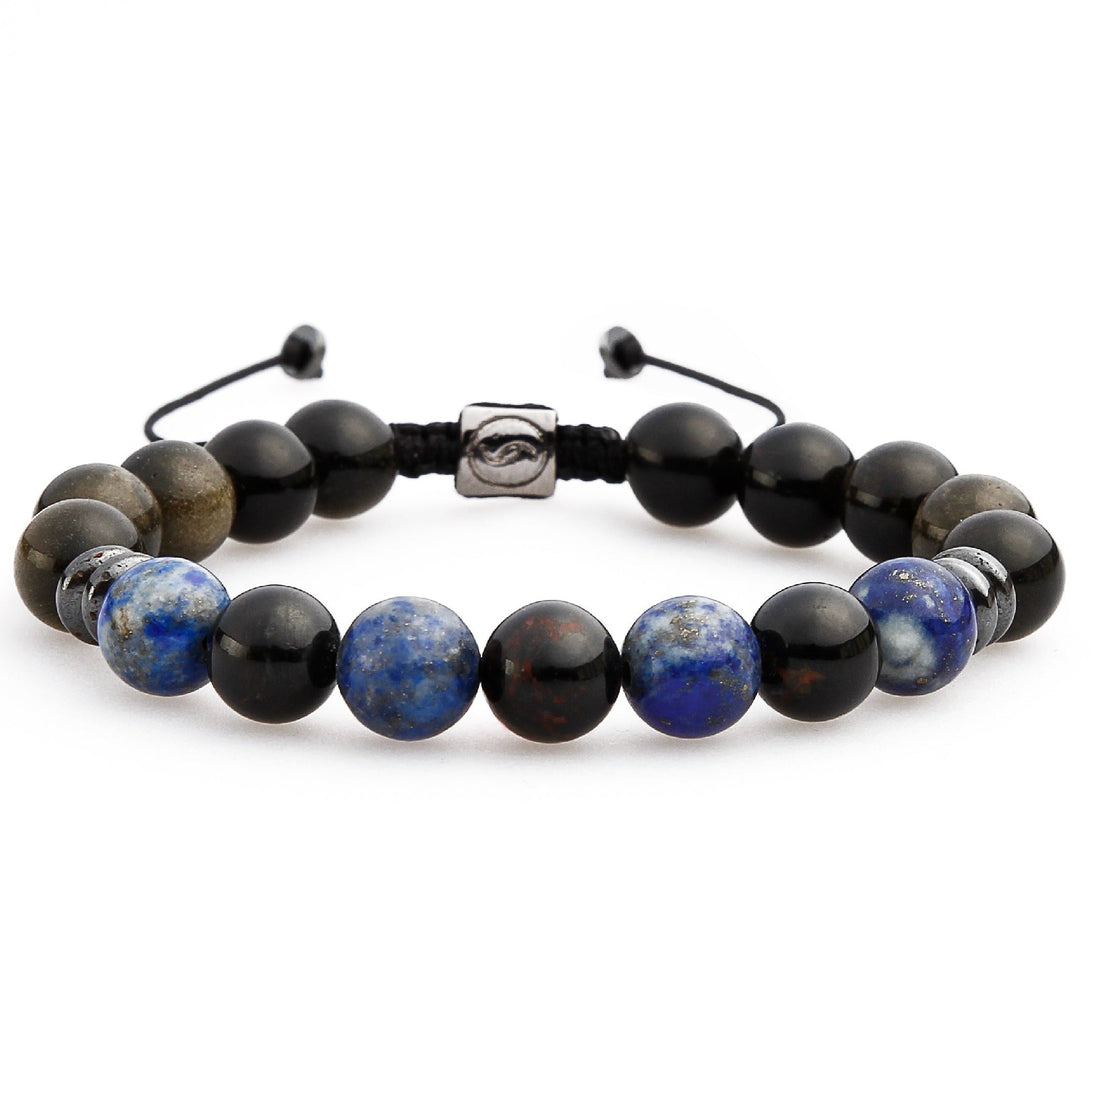 Lapis Lazuli Obsidian Black Tourmaline healing natural gemstone beaded bracelet for Shield and Protection for Men and Women